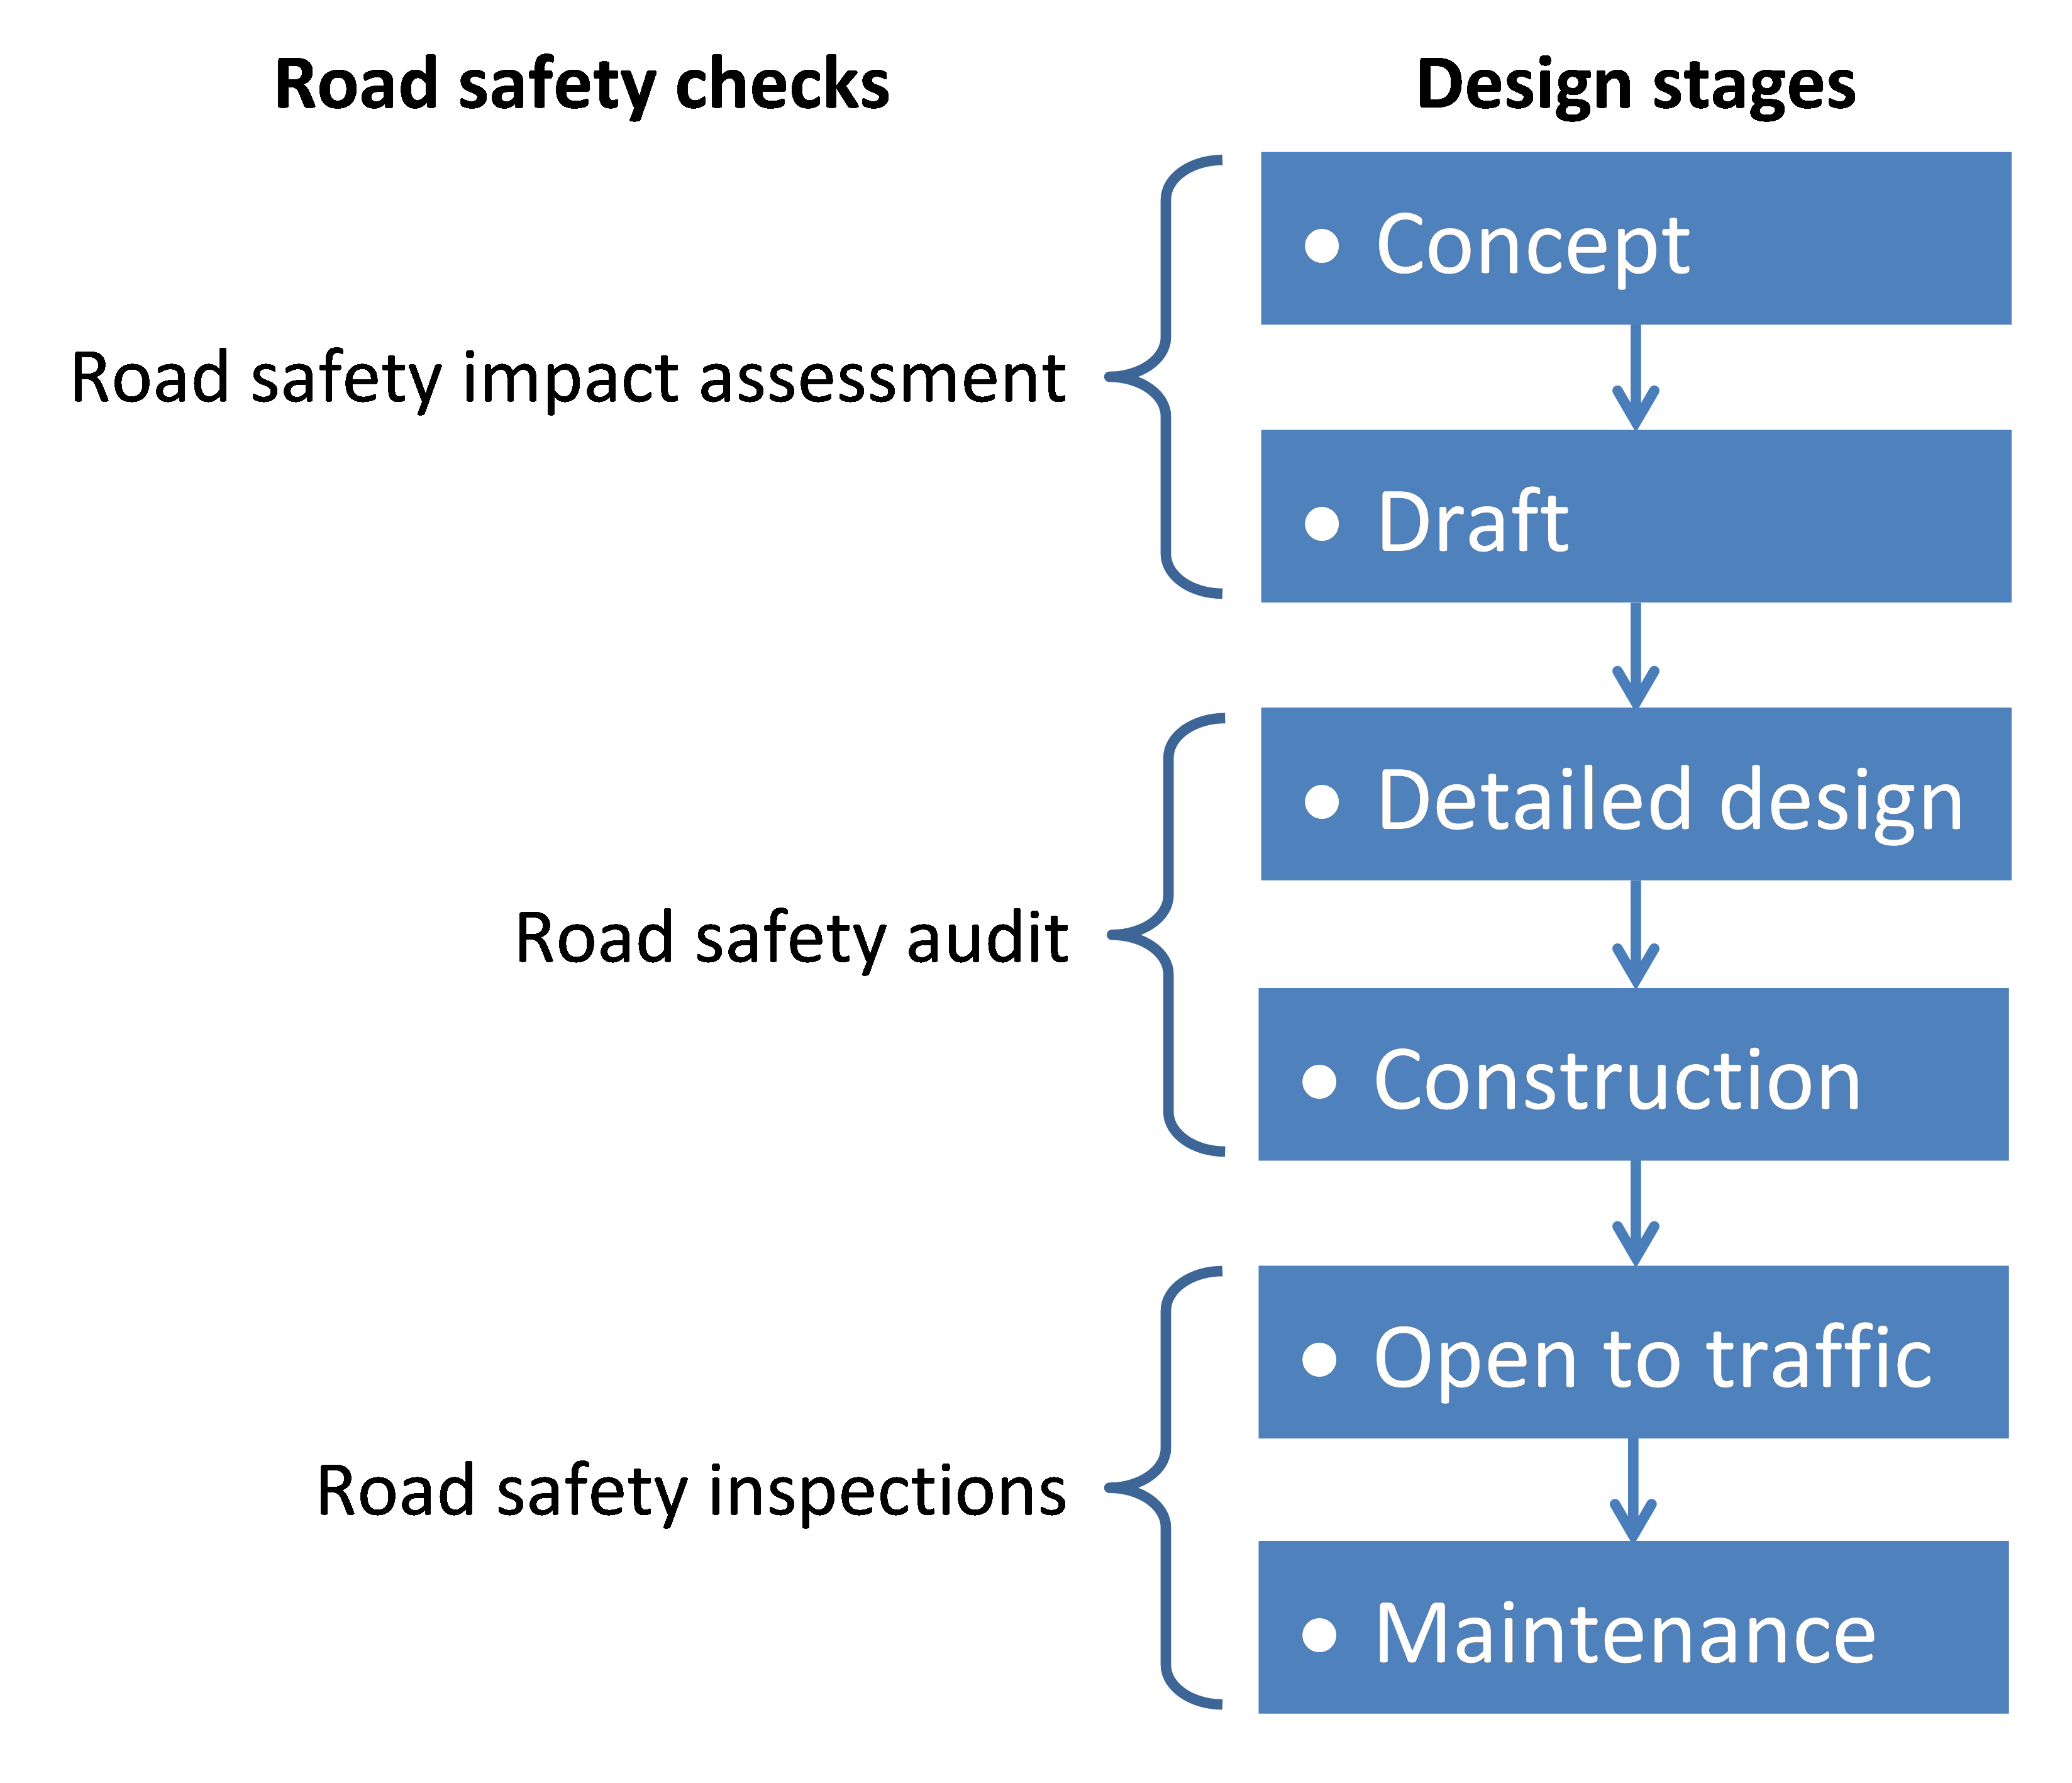 Figure 10.8 Sequence of road safety checks during the design stages